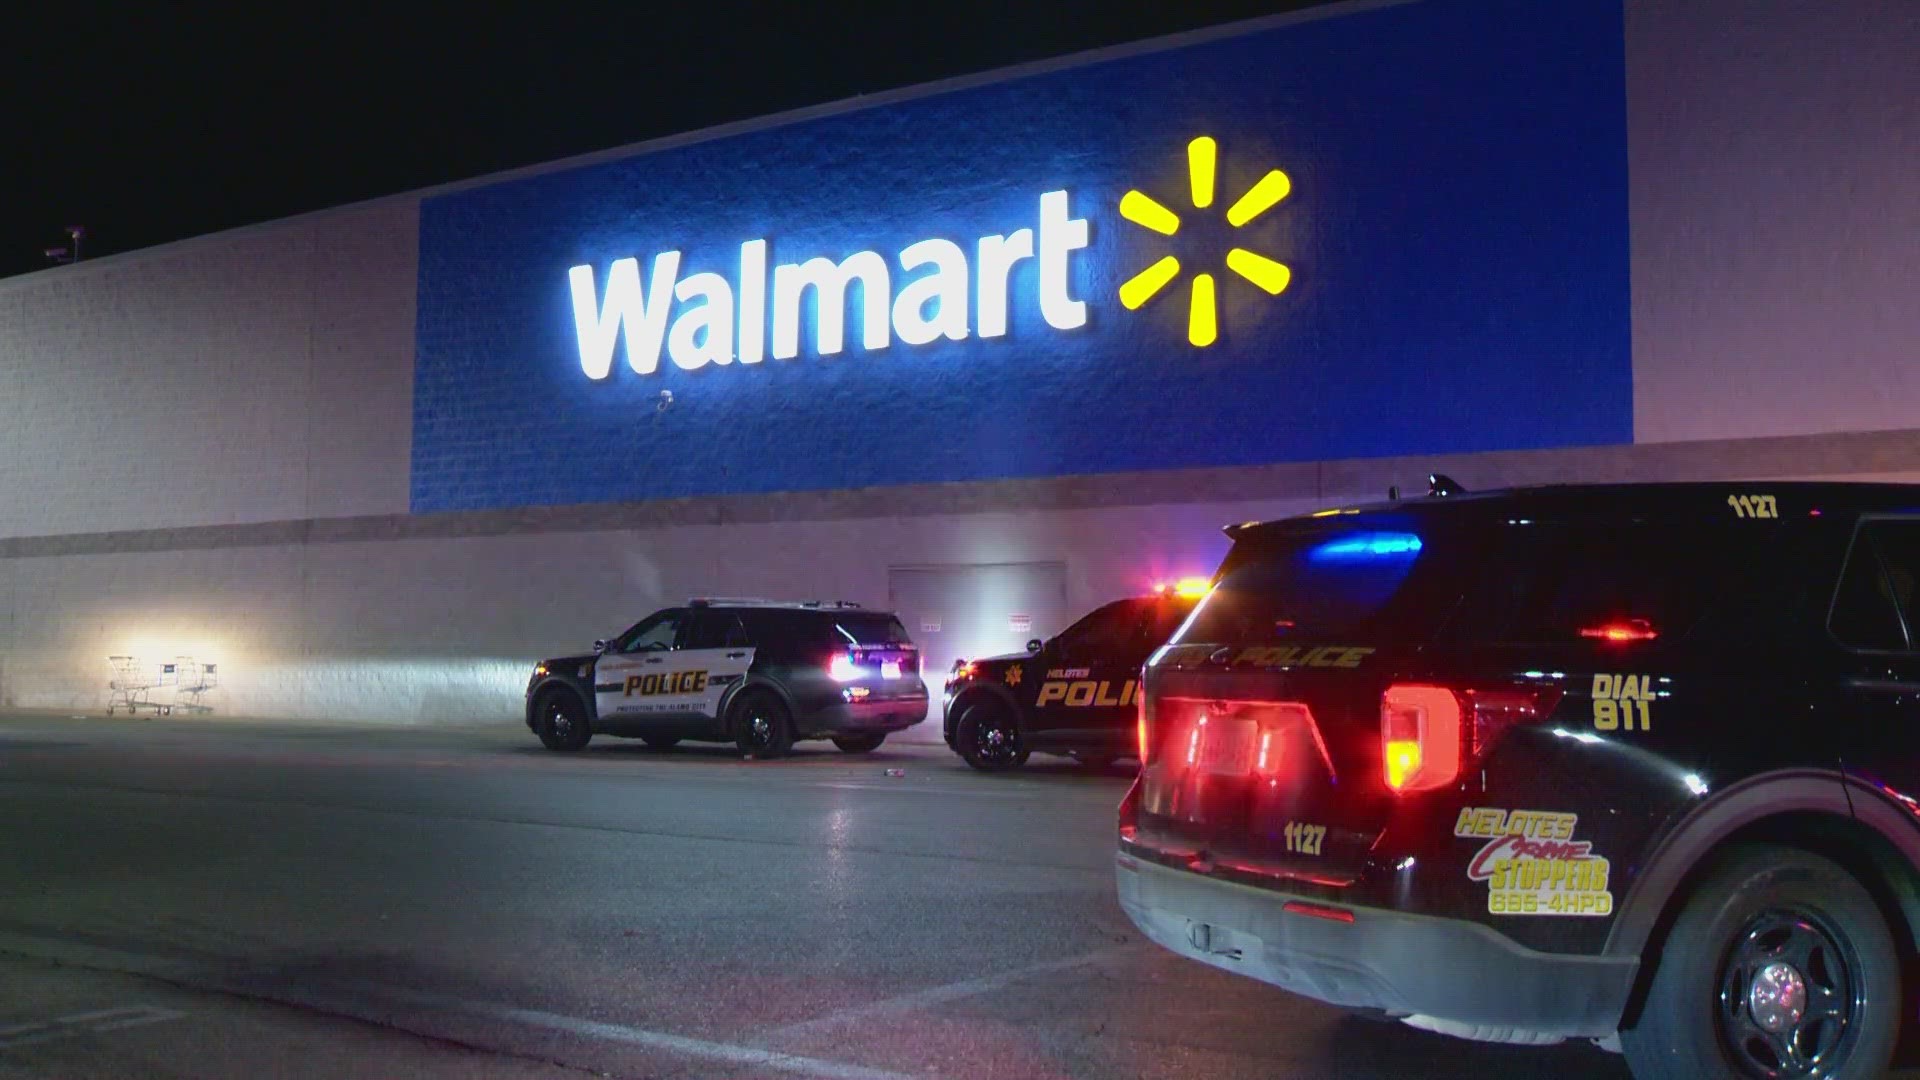 Authorities said the suspect fired a shot inside the store before he was shot by a deputy.